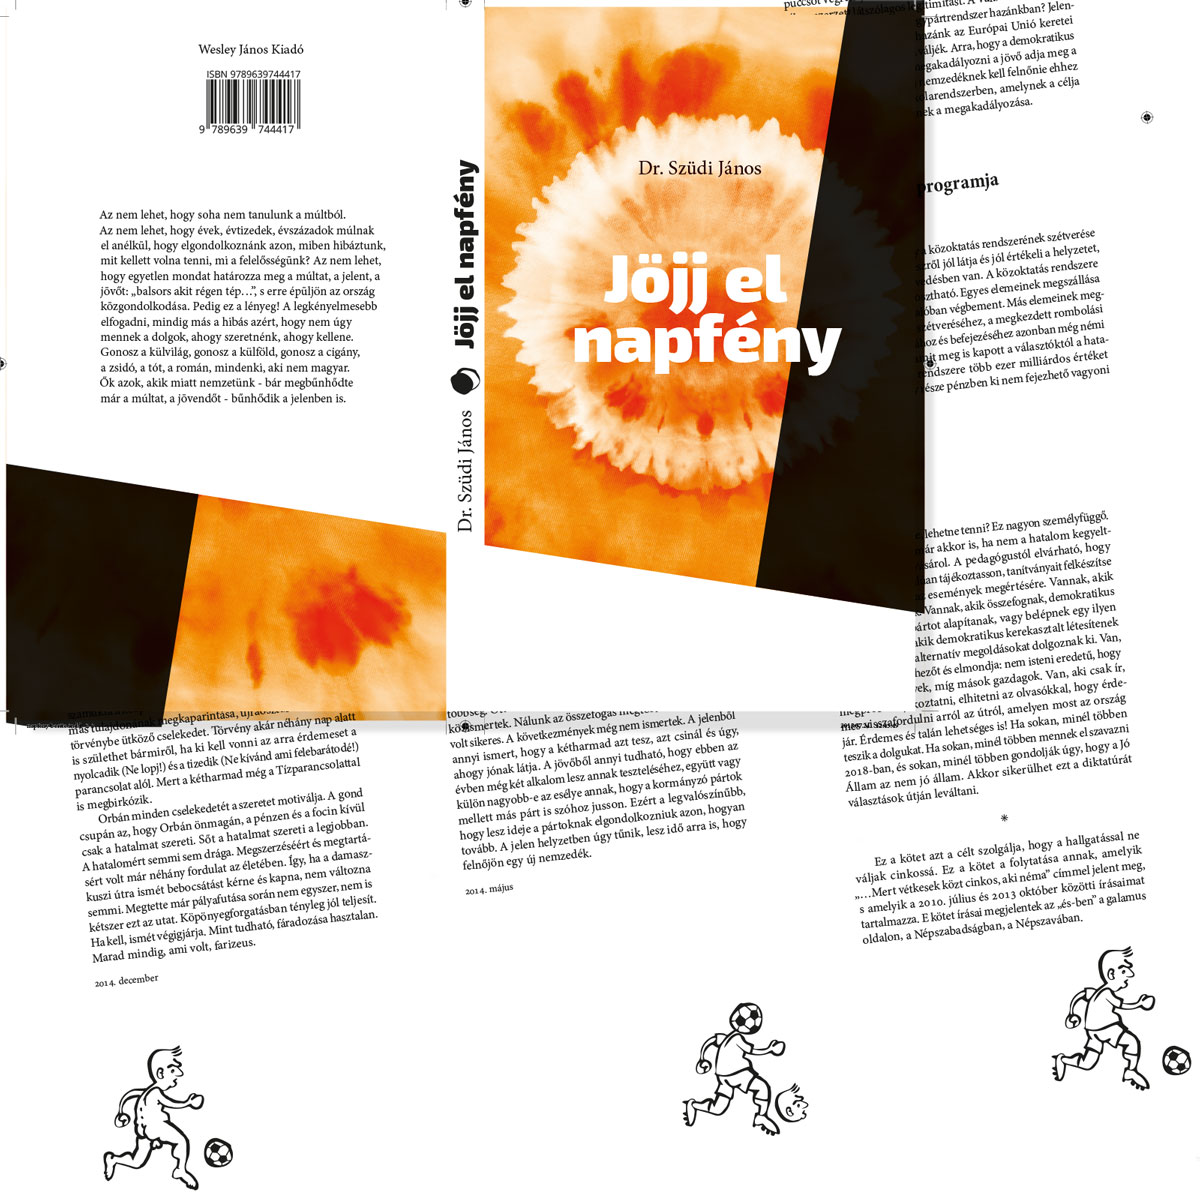 book cover with abstract flower-like image